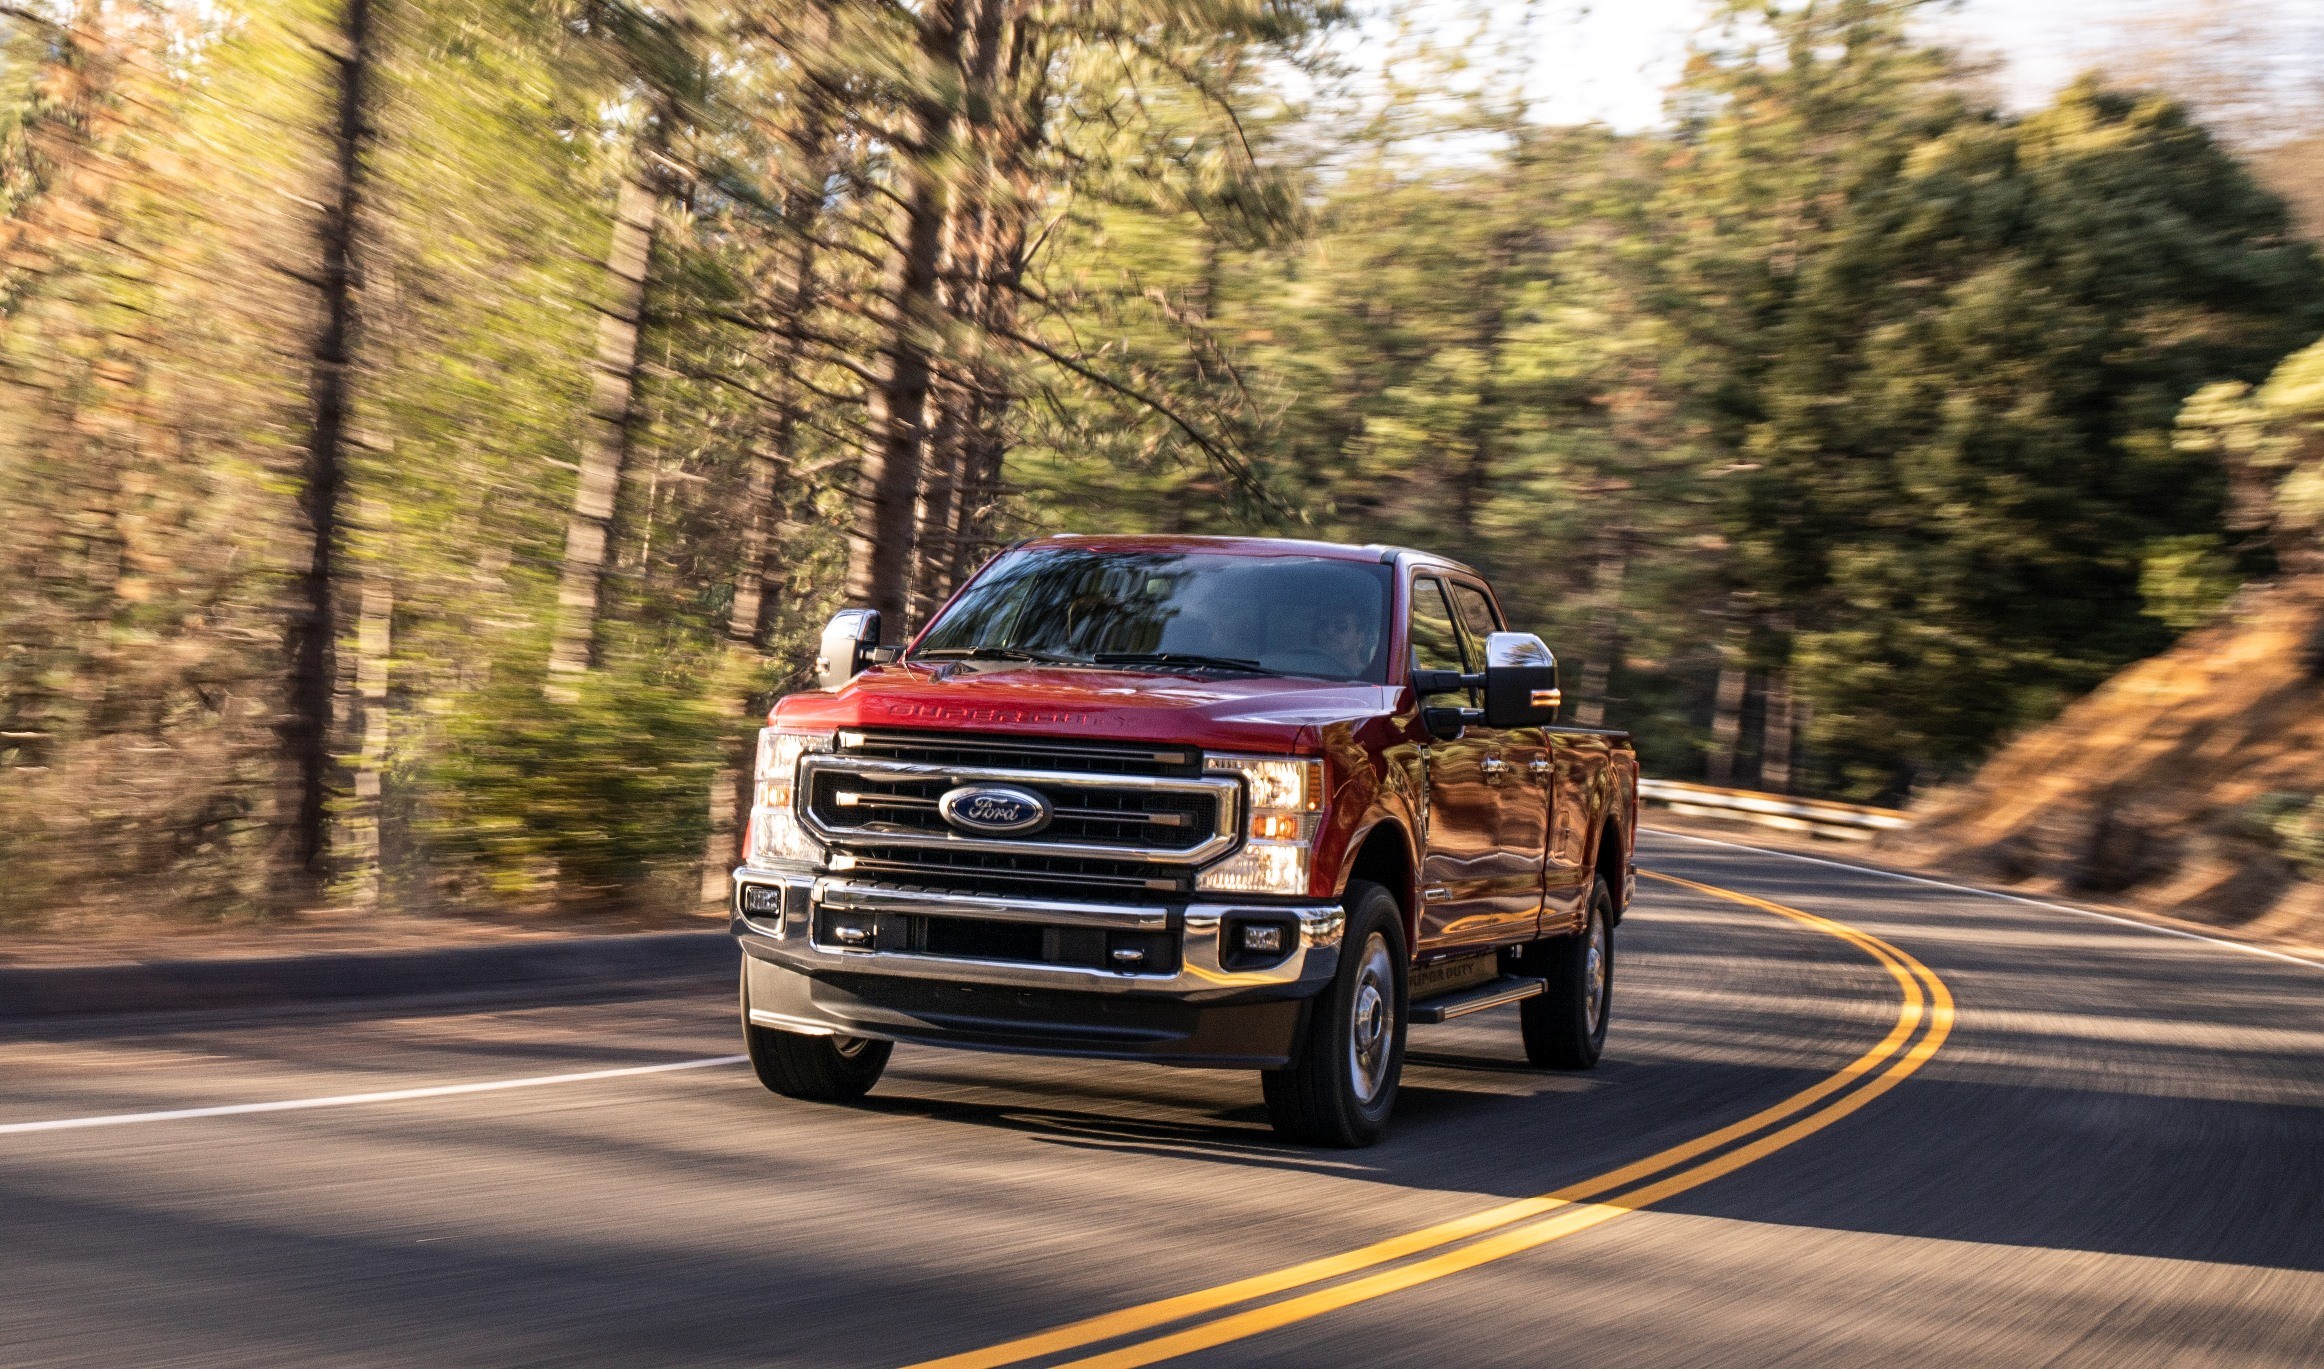 New 7 3L V8 Added To 2022 Ford F Series Super Duty Lineup 